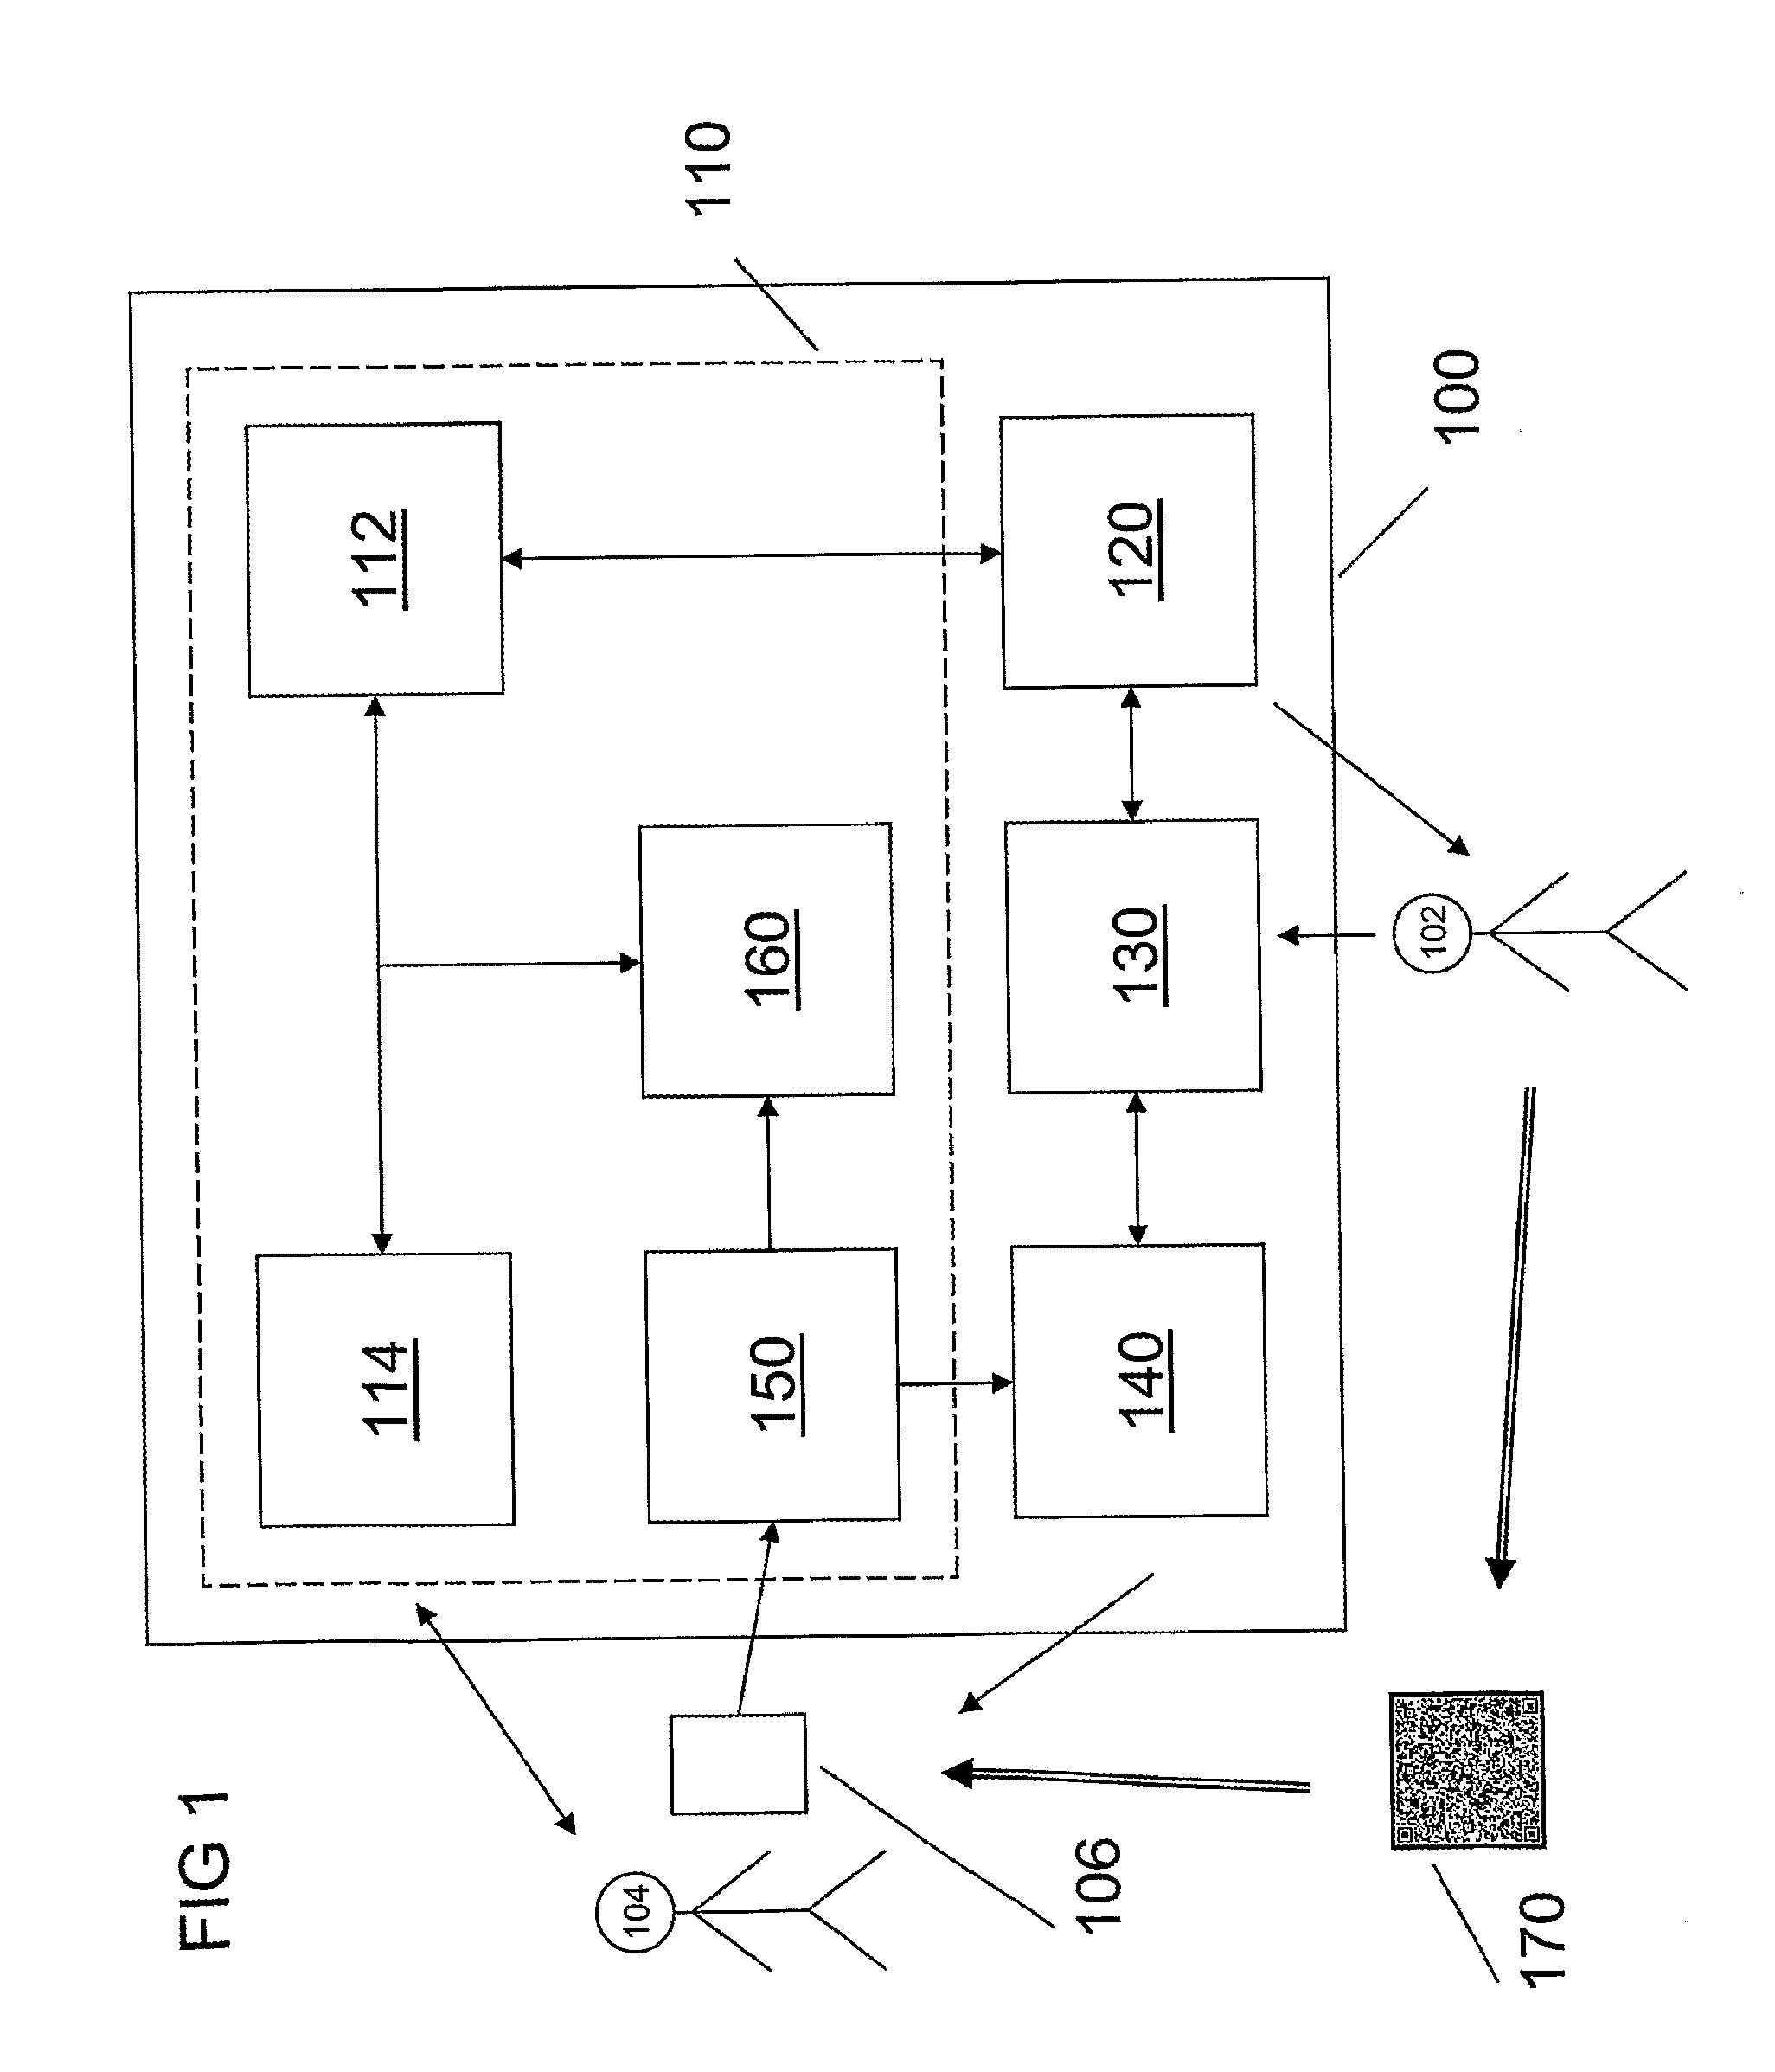 Method and System for Managing Customer Relationships